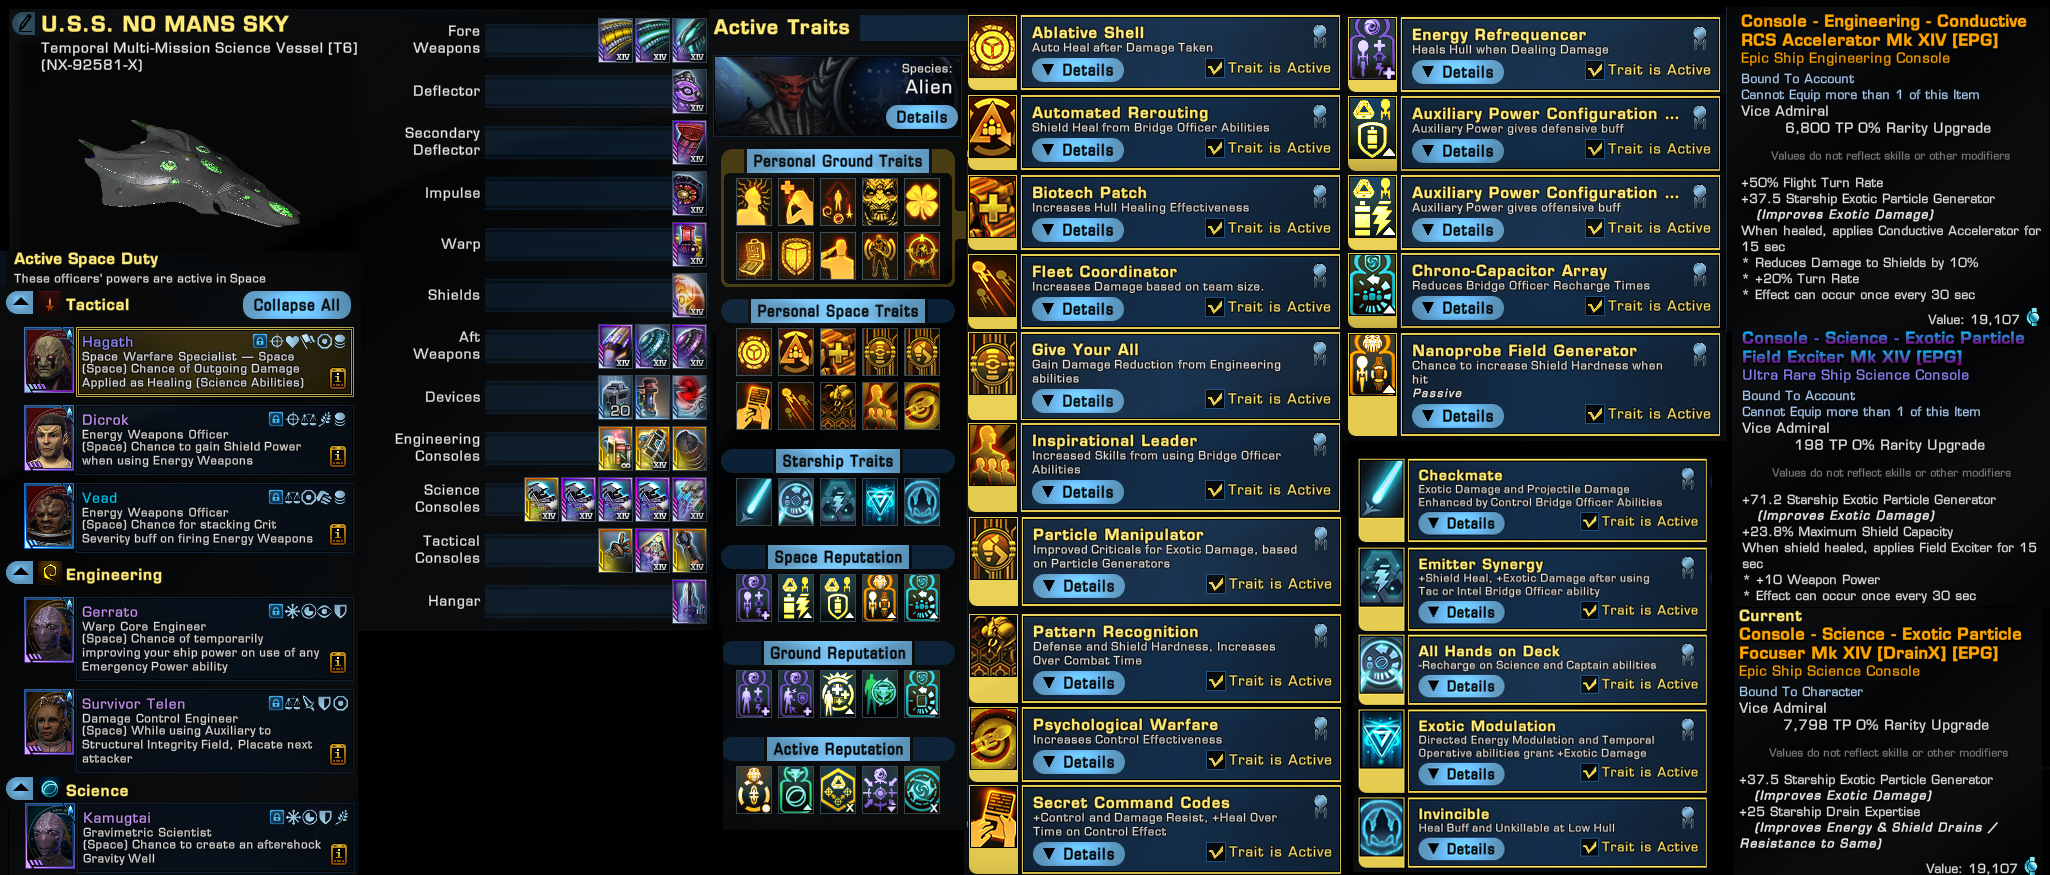 Sto ship weapons dmg or crtd 1